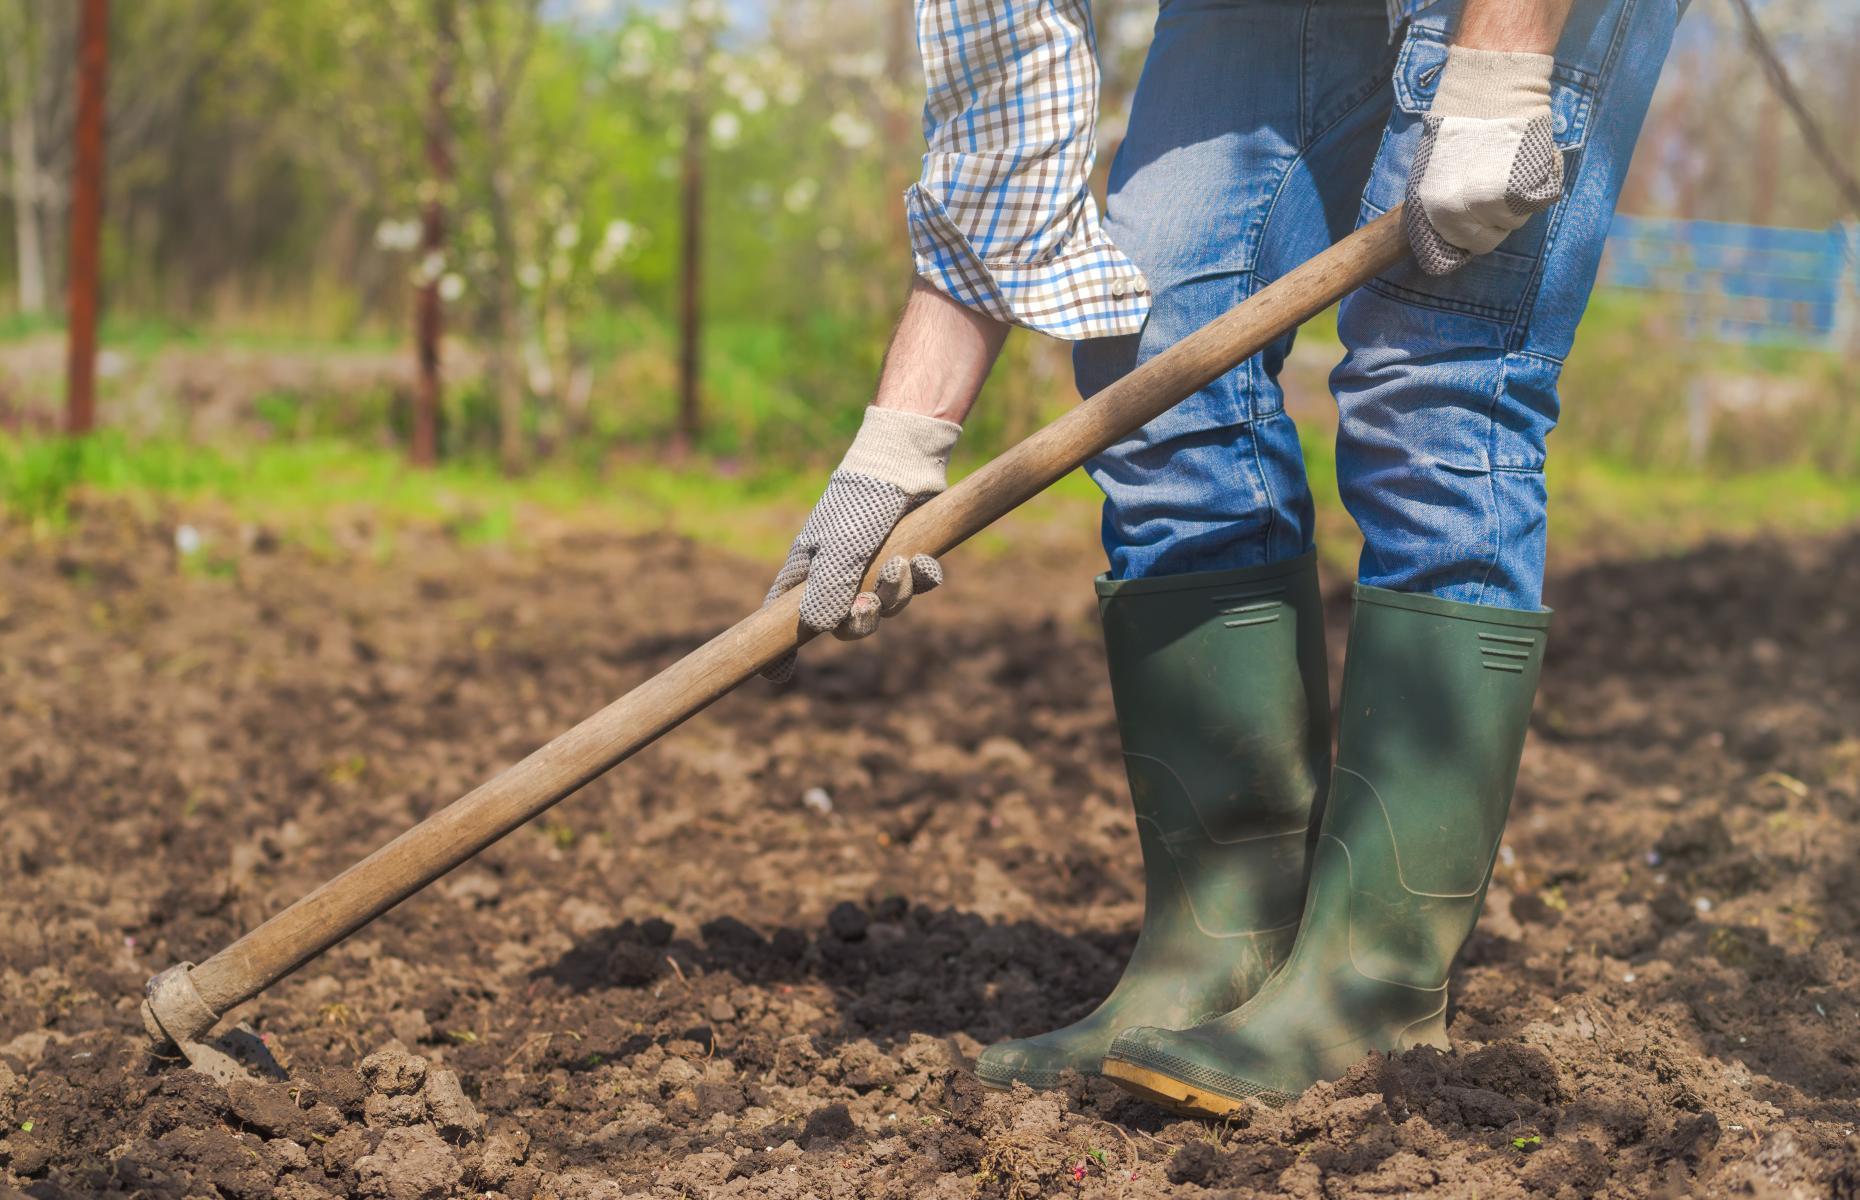 <p><a href="https://www.loveproperty.com/news/72432/15-ways-to-spruce-up-your-garden-for-spring">Remove weeds</a> as soon as you see them so that they don’t have the opportunity to produce seeds and spread. Weed by hand or use a hoe, keeping the blade edge sharp to sever the weeds so that they can be left to wither where they fall. <a href="https://www.rhs.org.uk/soil-composts-mulches/mulch">Mulching with organic matter</a>, leaving it on the surface of the soil, is a good way to stop new weeds from popping up. </p>